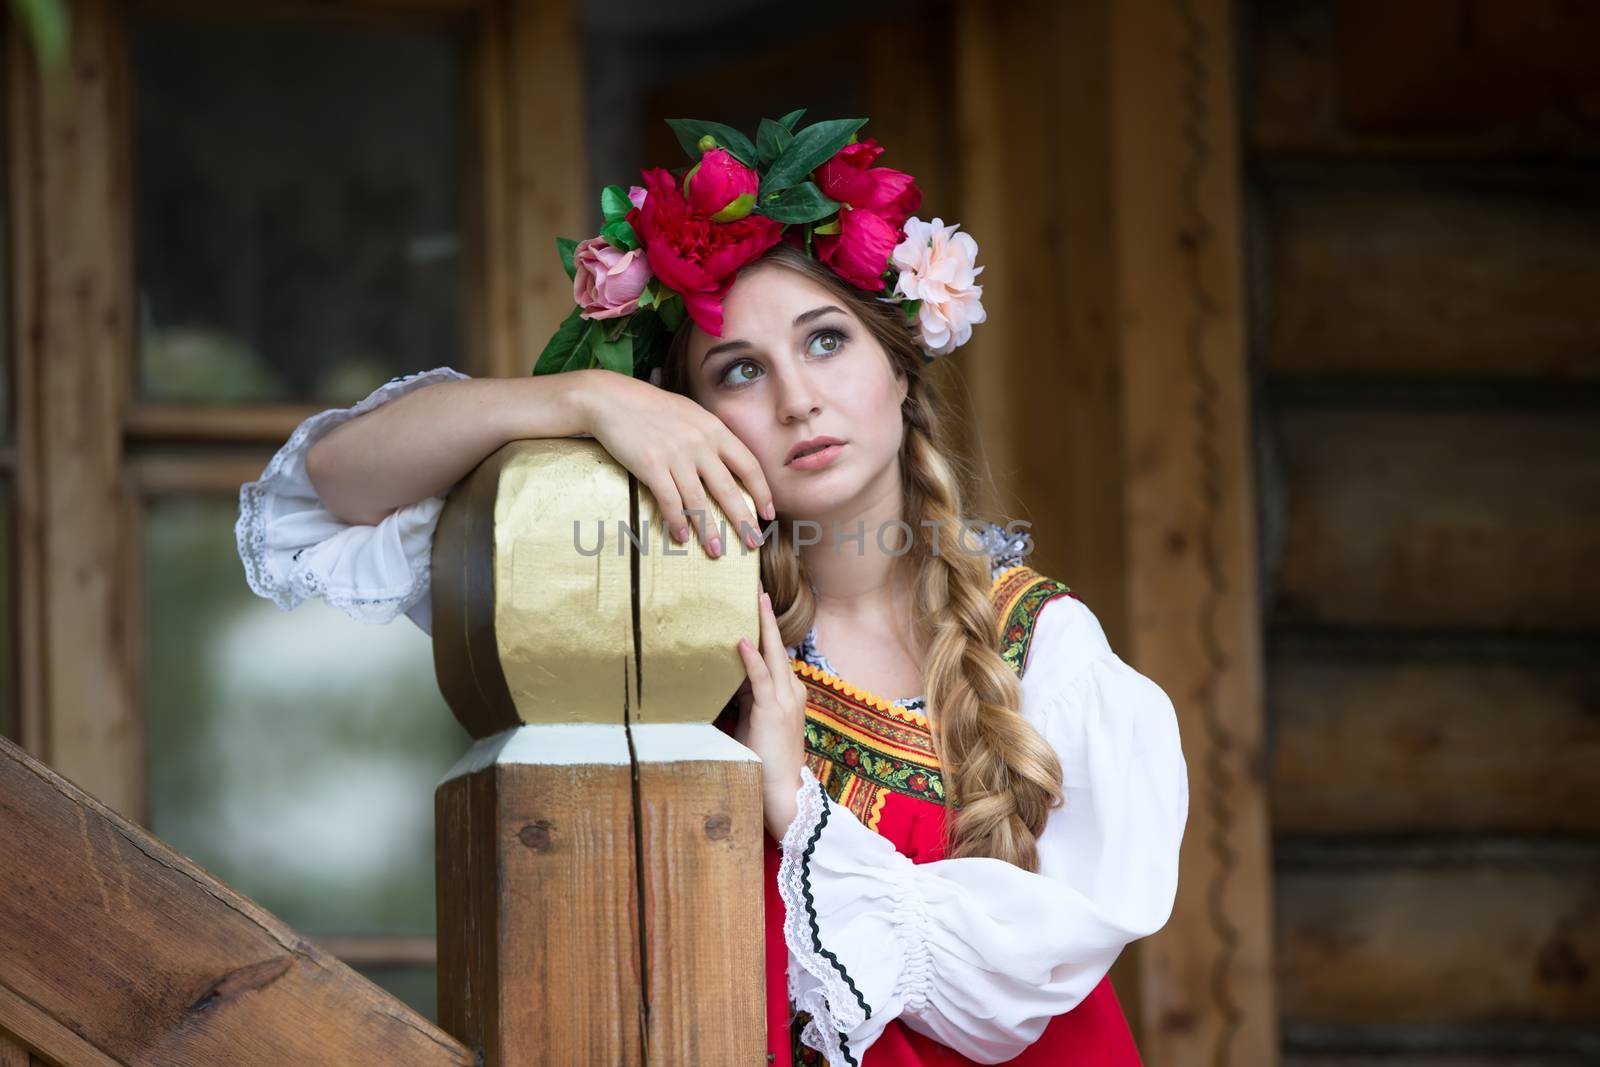 Russian beauty, emotional girl in traditional folk Russian costume and headdress adorable smiling and laughing